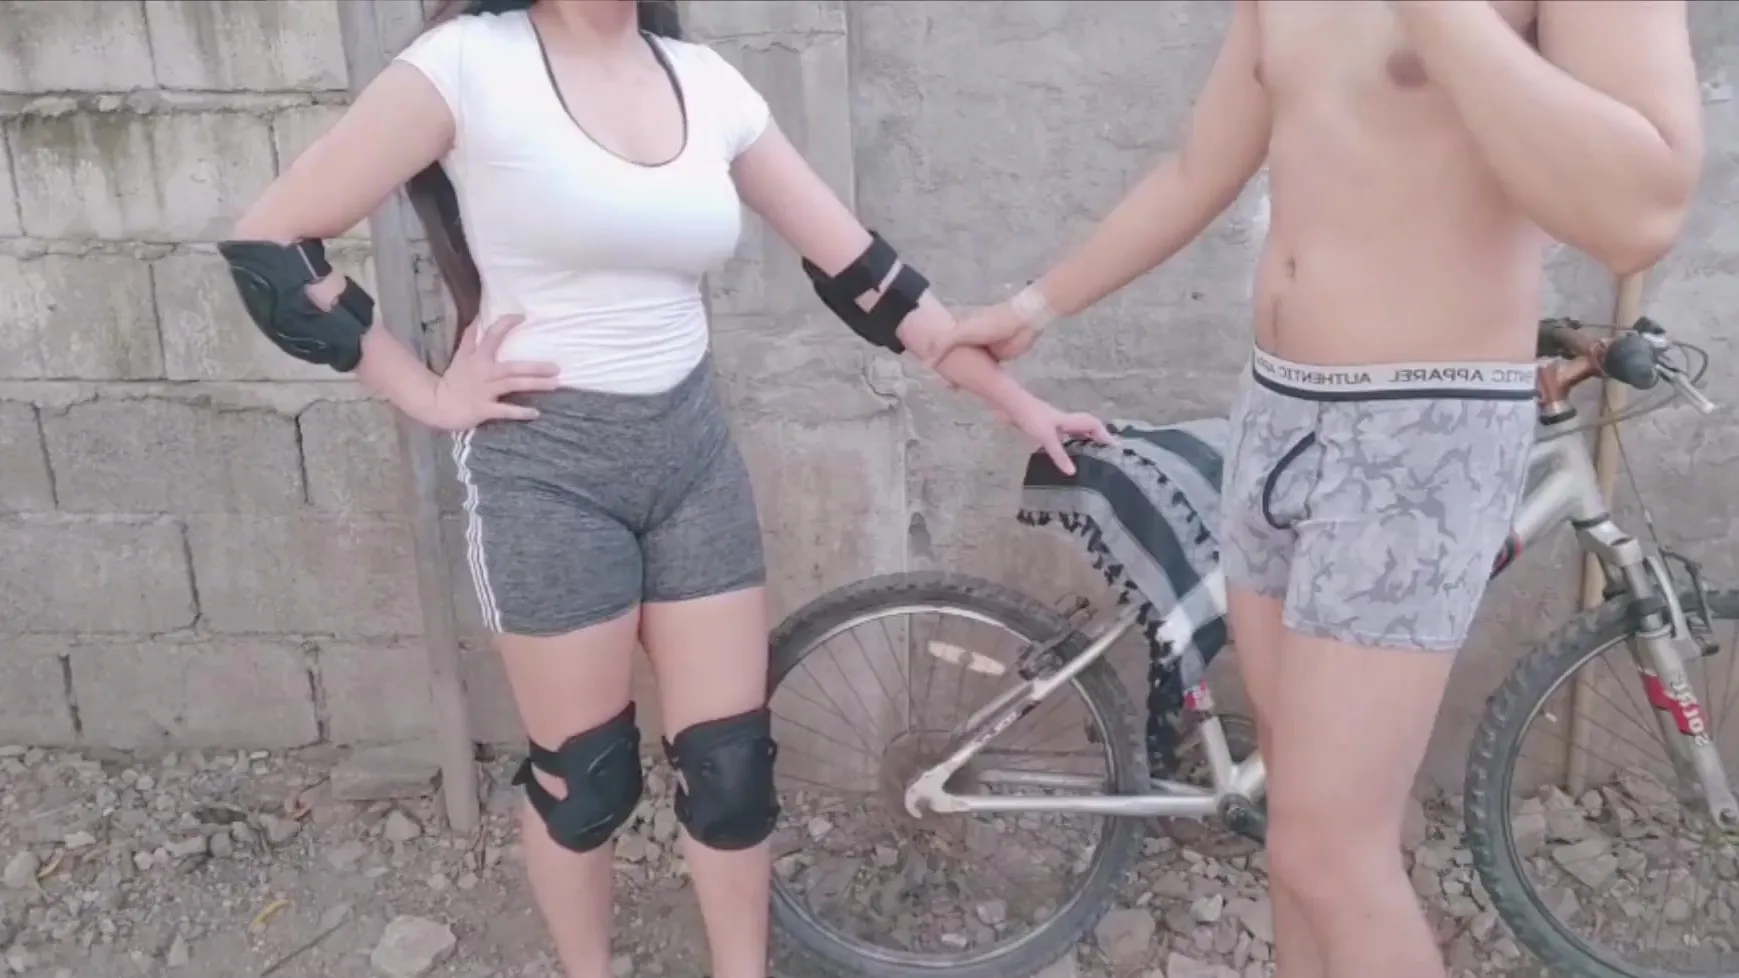 Outdoor Group Sex Bicycle - Asian female bike enthusiast fucks with a random guy outdoors